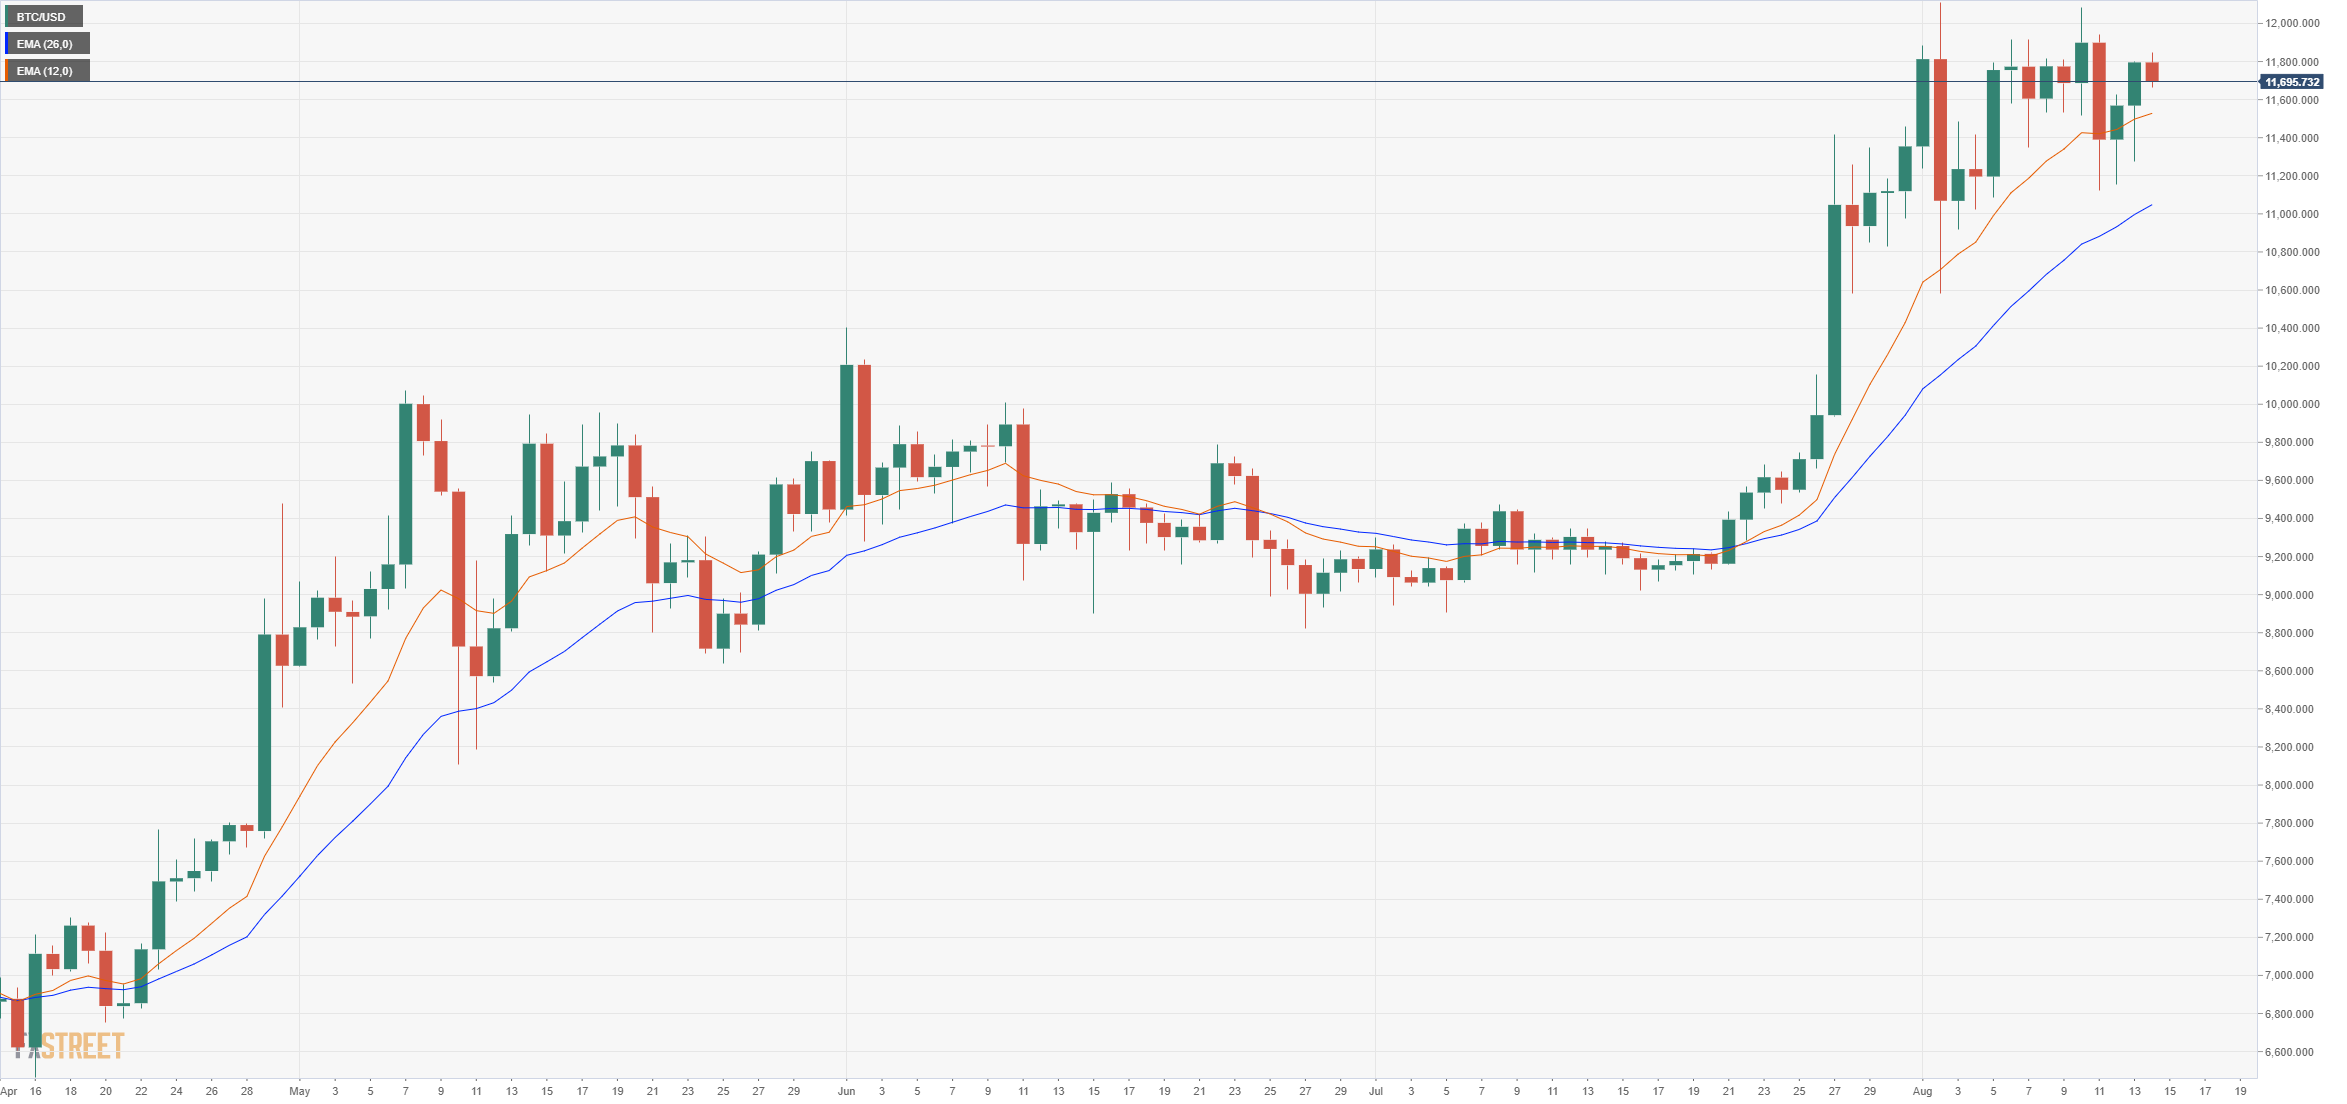 Bitcoin Technical Analysis: BTC/USD lags behind Ethereum which already hade a breakout above $400